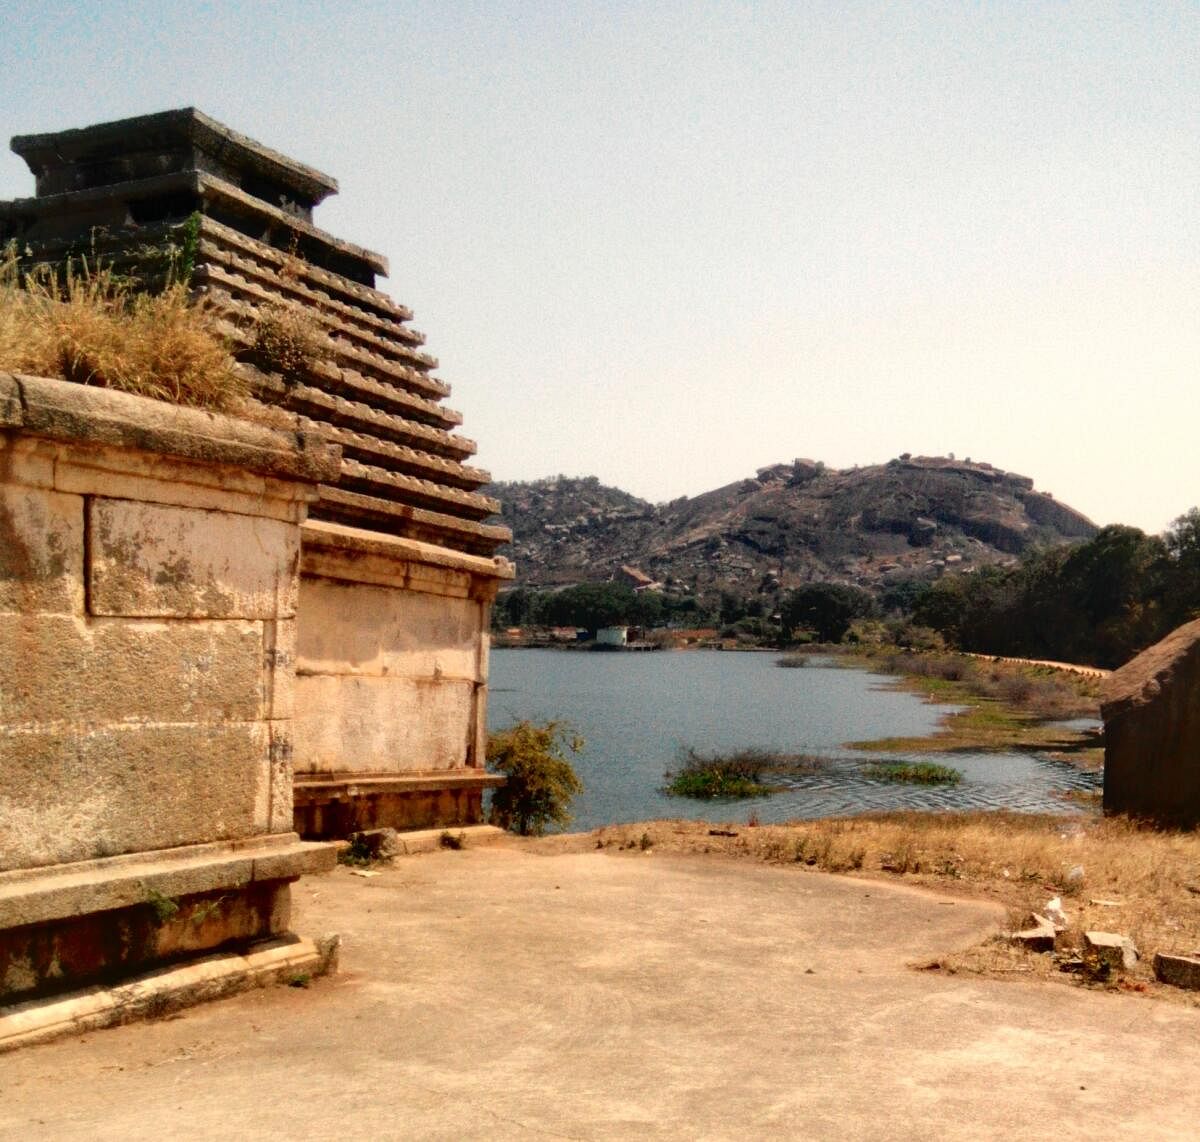 A view of the lakeside temple.